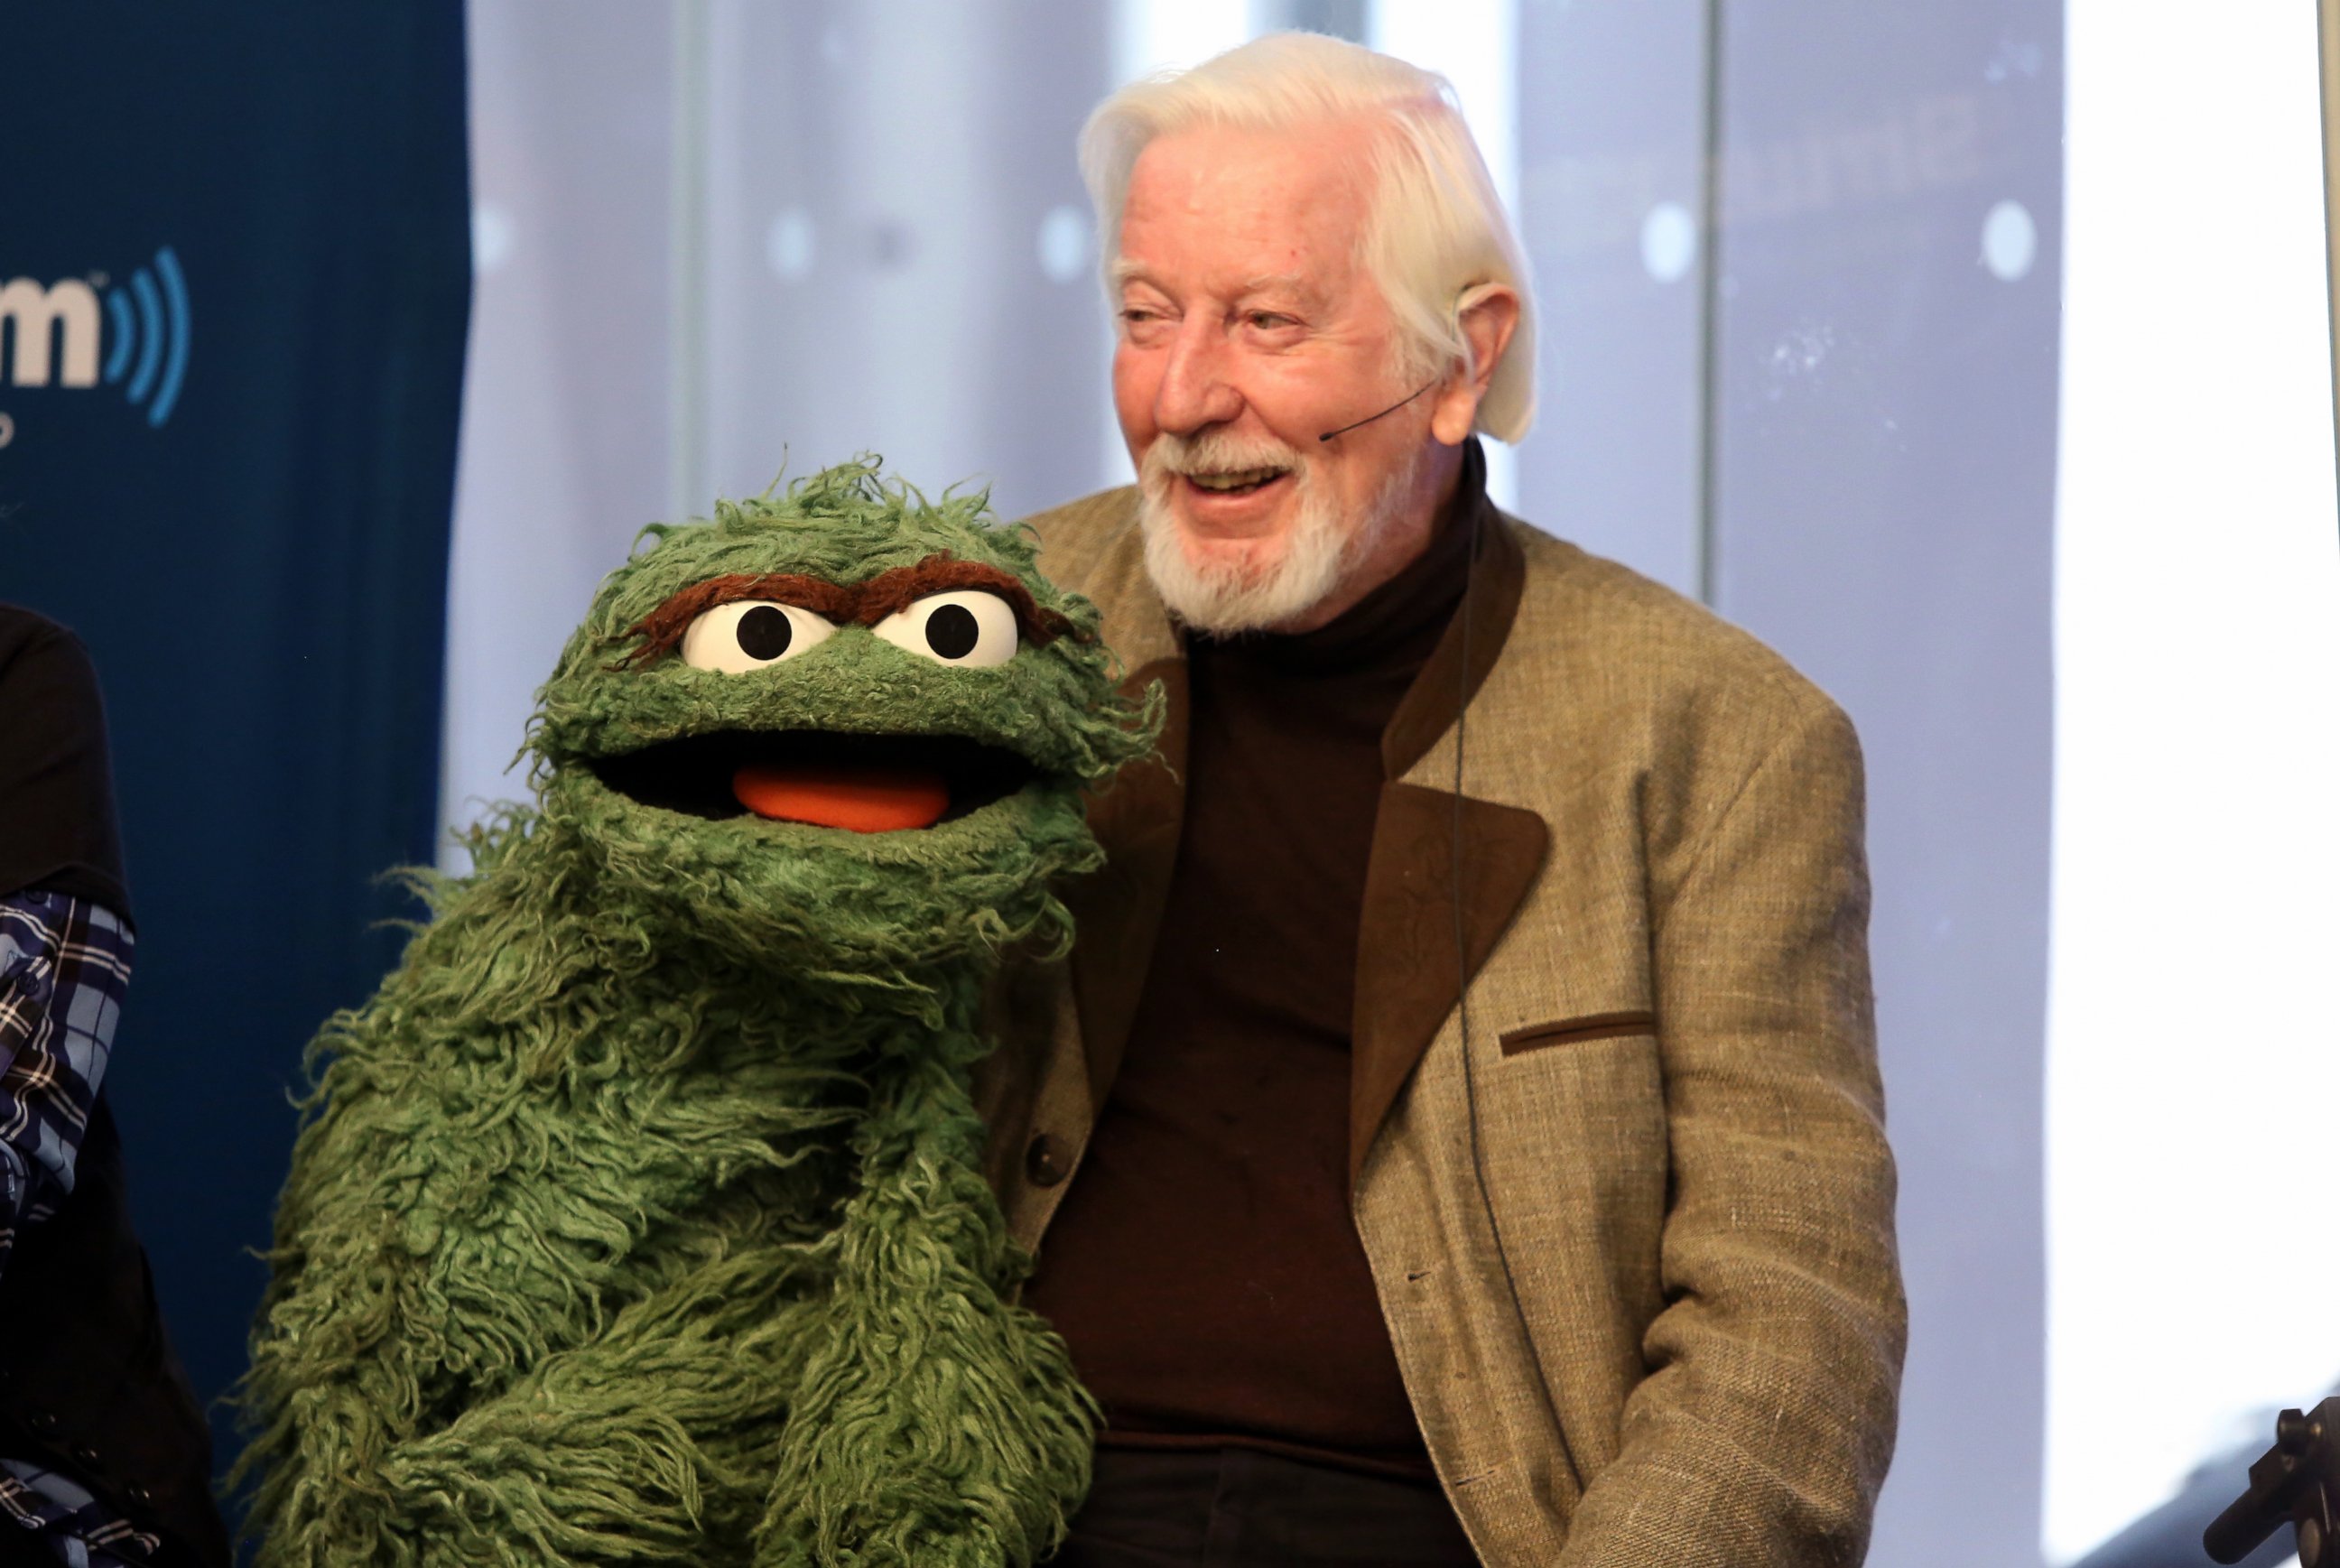 PHOTO: Caroll Spinney attends SiriusXM's Town Hall with original cast members from "Sesame Street" commemorating the 45th anniversary of the celebrated series debut on public television, Oct. 9, 2014, in New York.